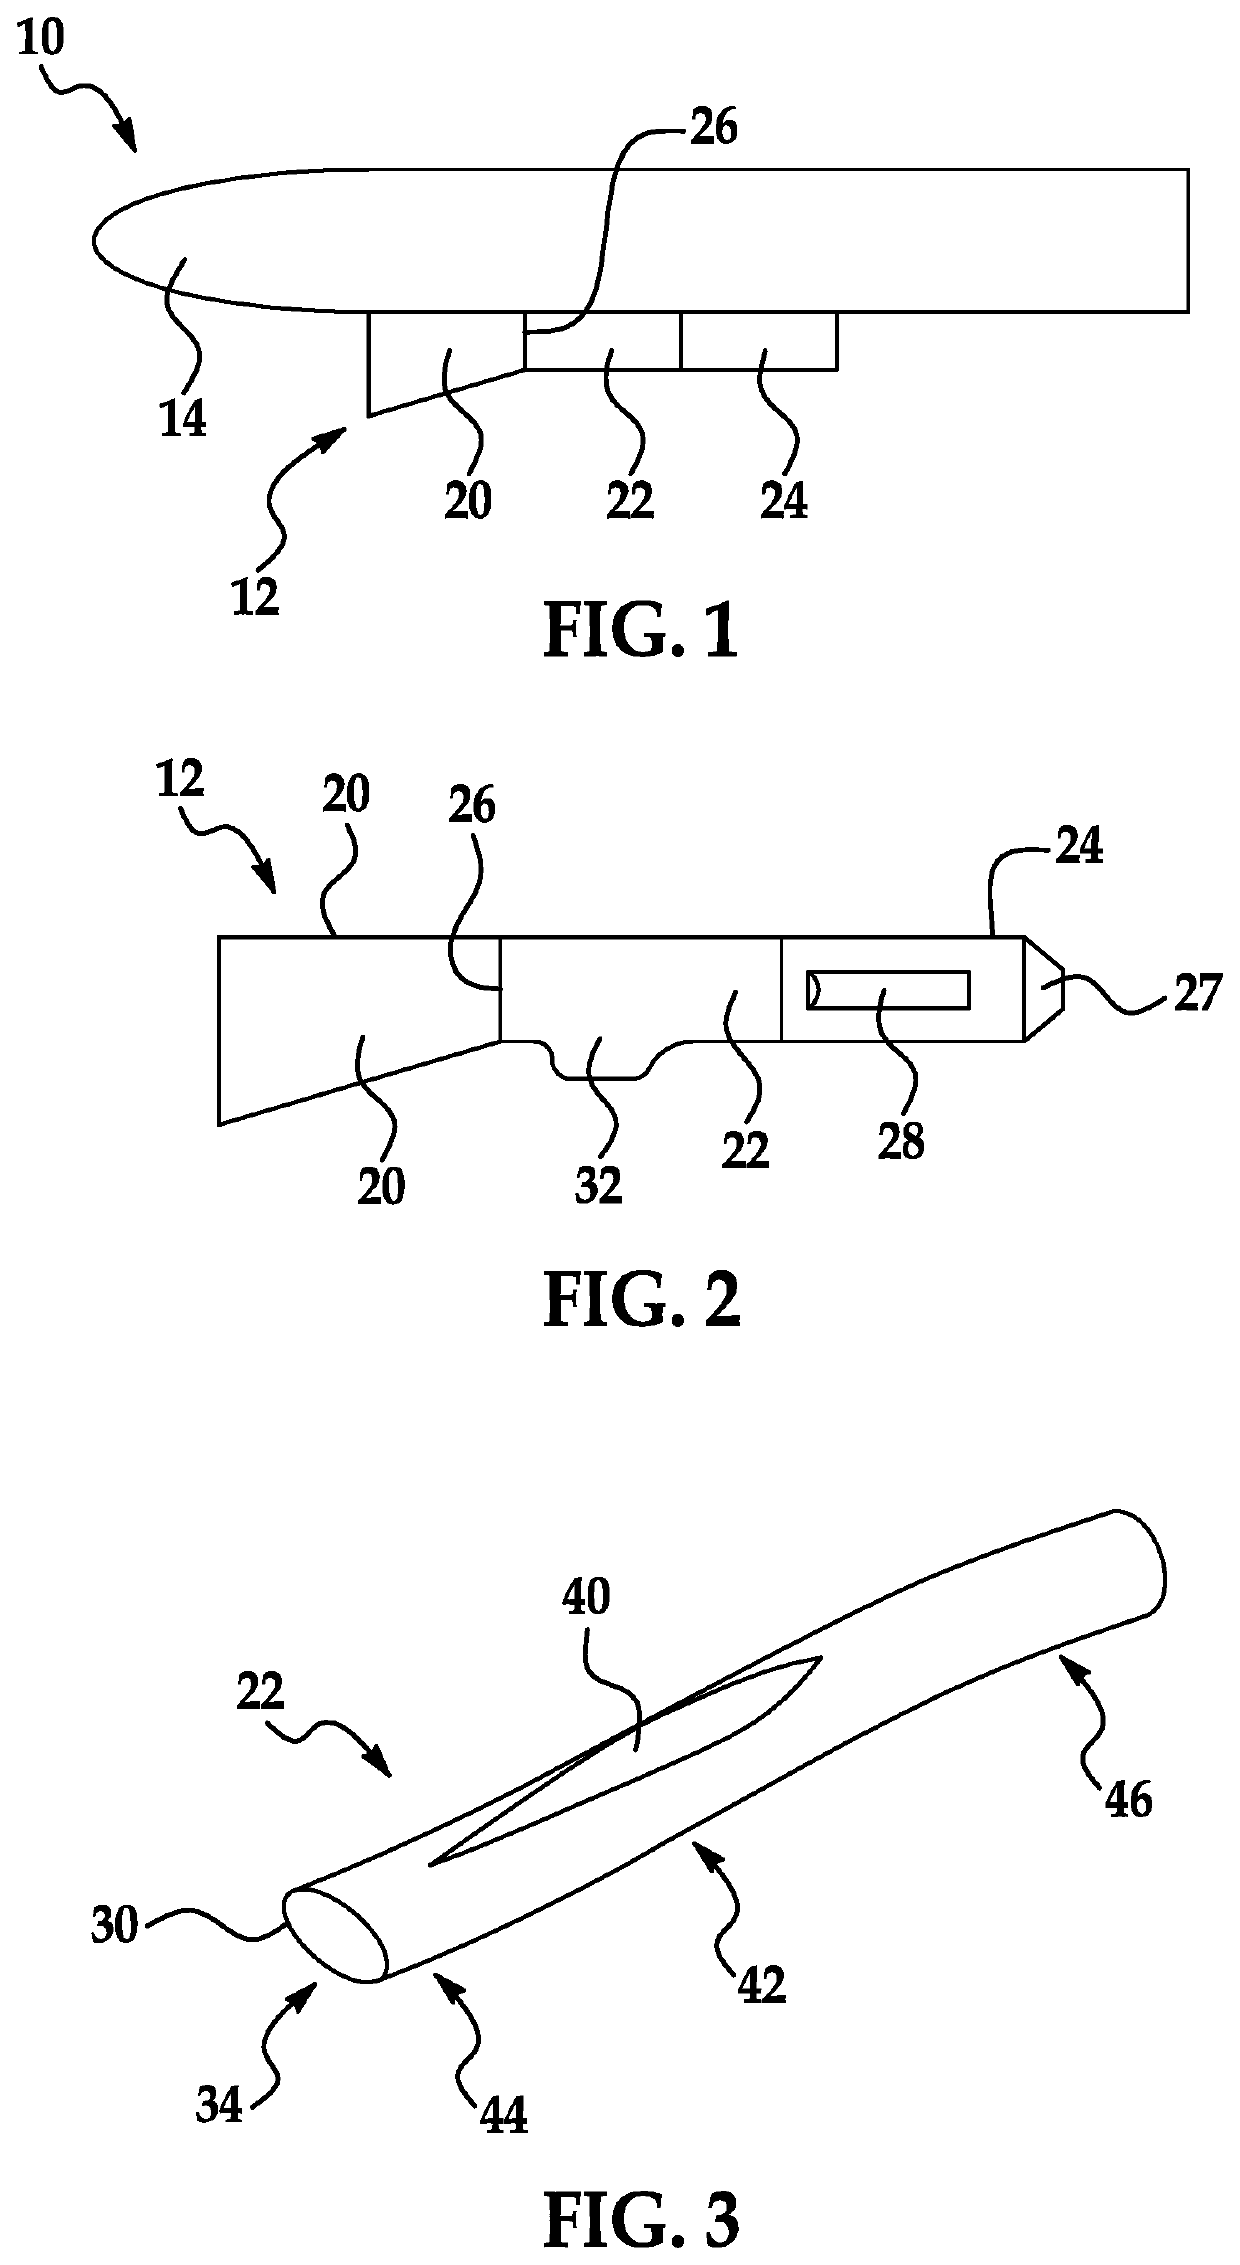 Flight vehicle air breathing propulsion system with isolator having obstruction